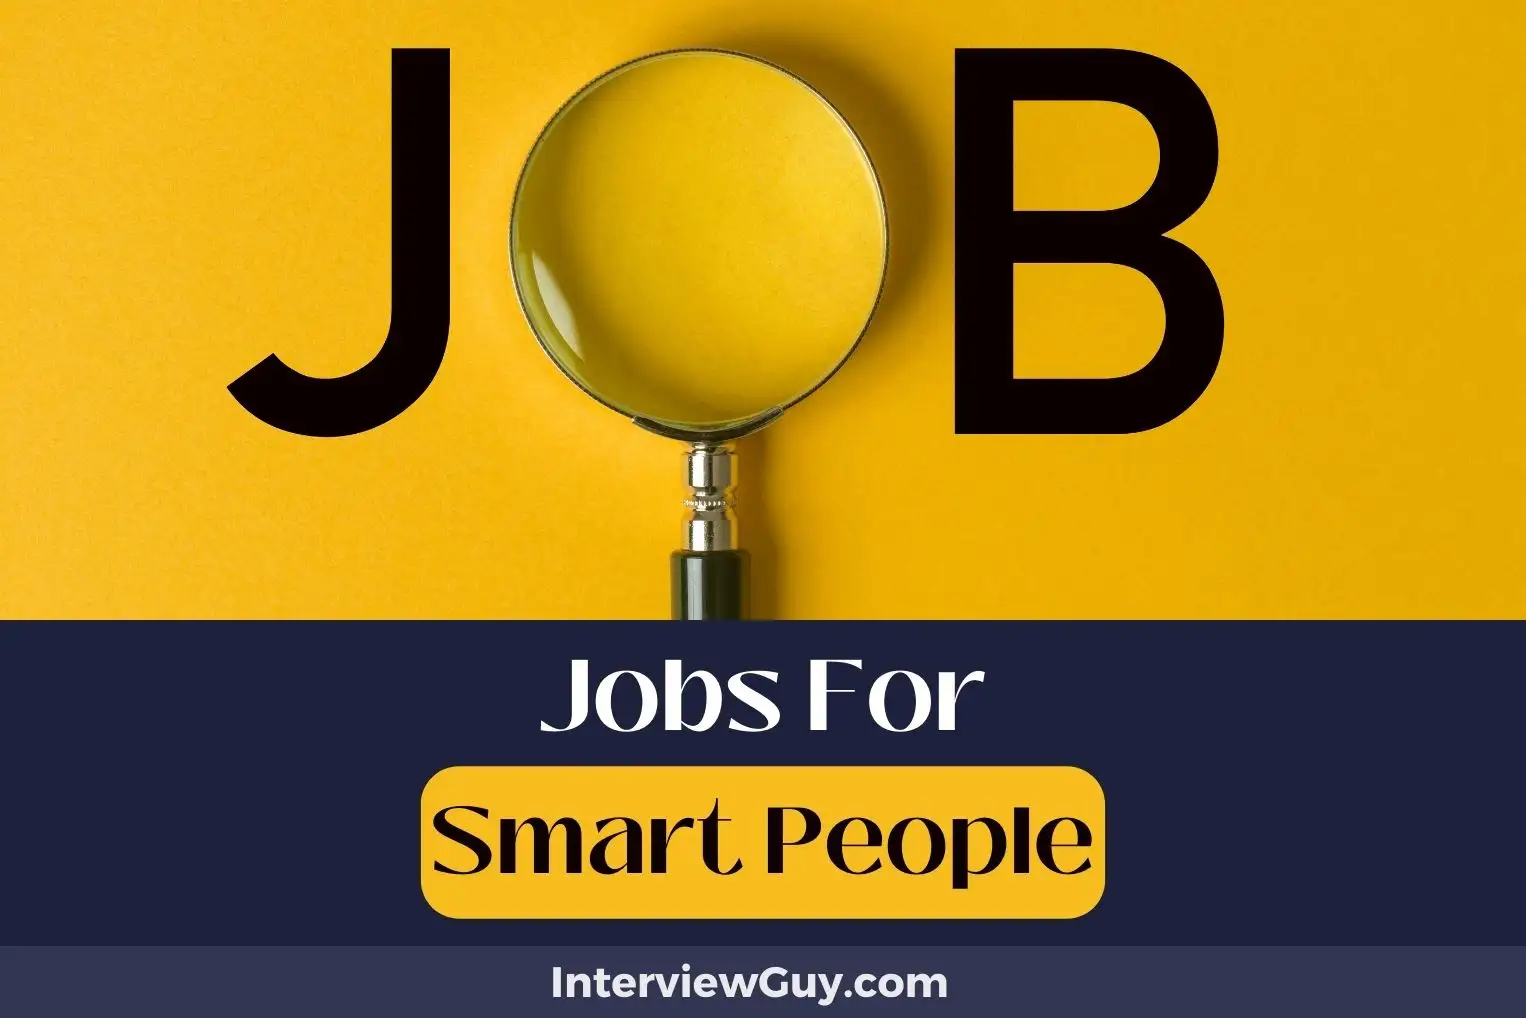 Jobs For Smart People